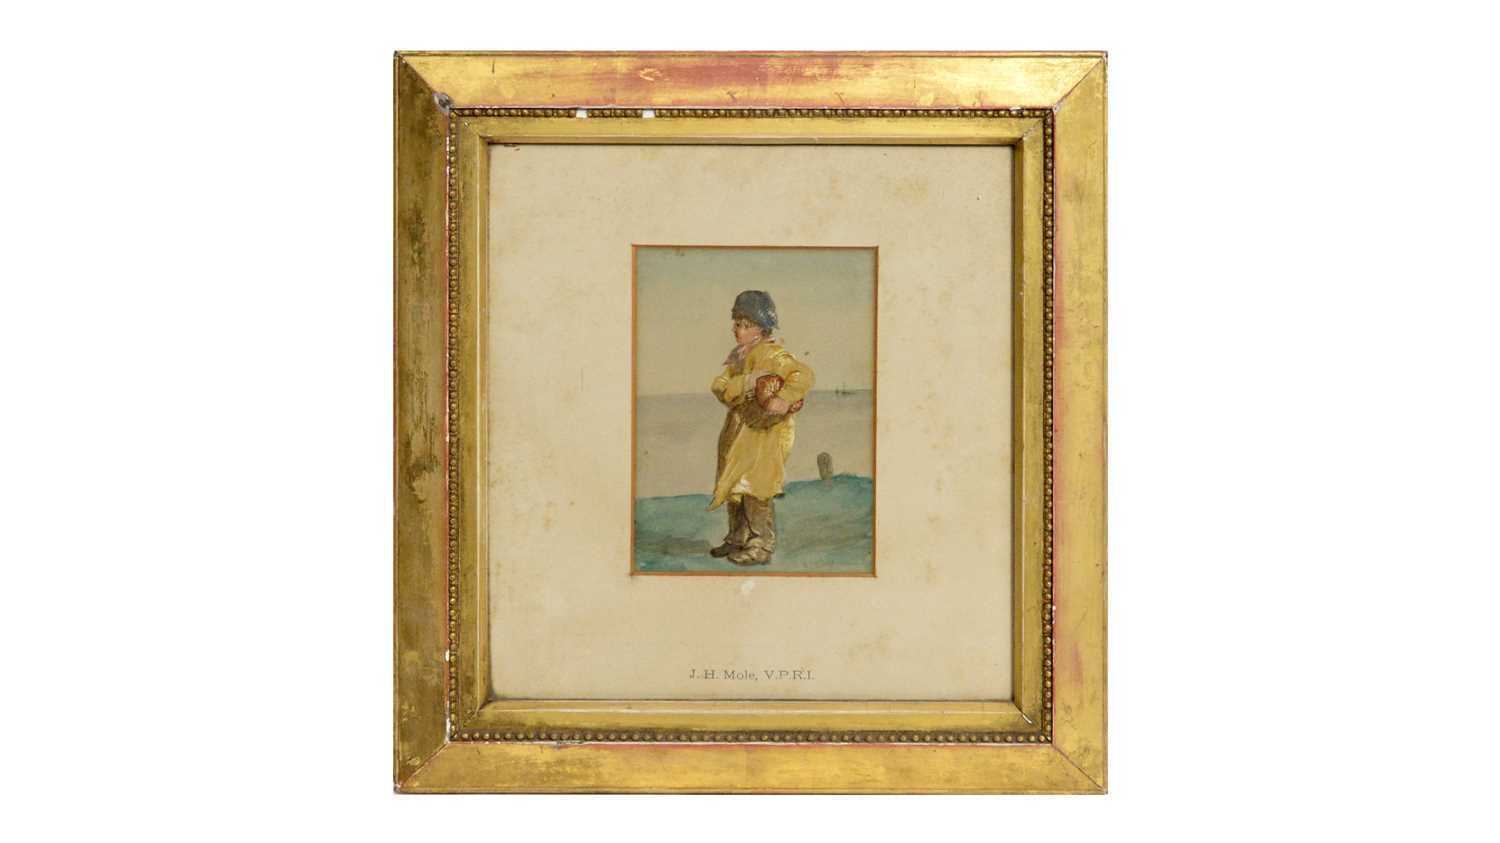 Lot 731 - In the manner of John Henry Mole - Hastings | watercolour